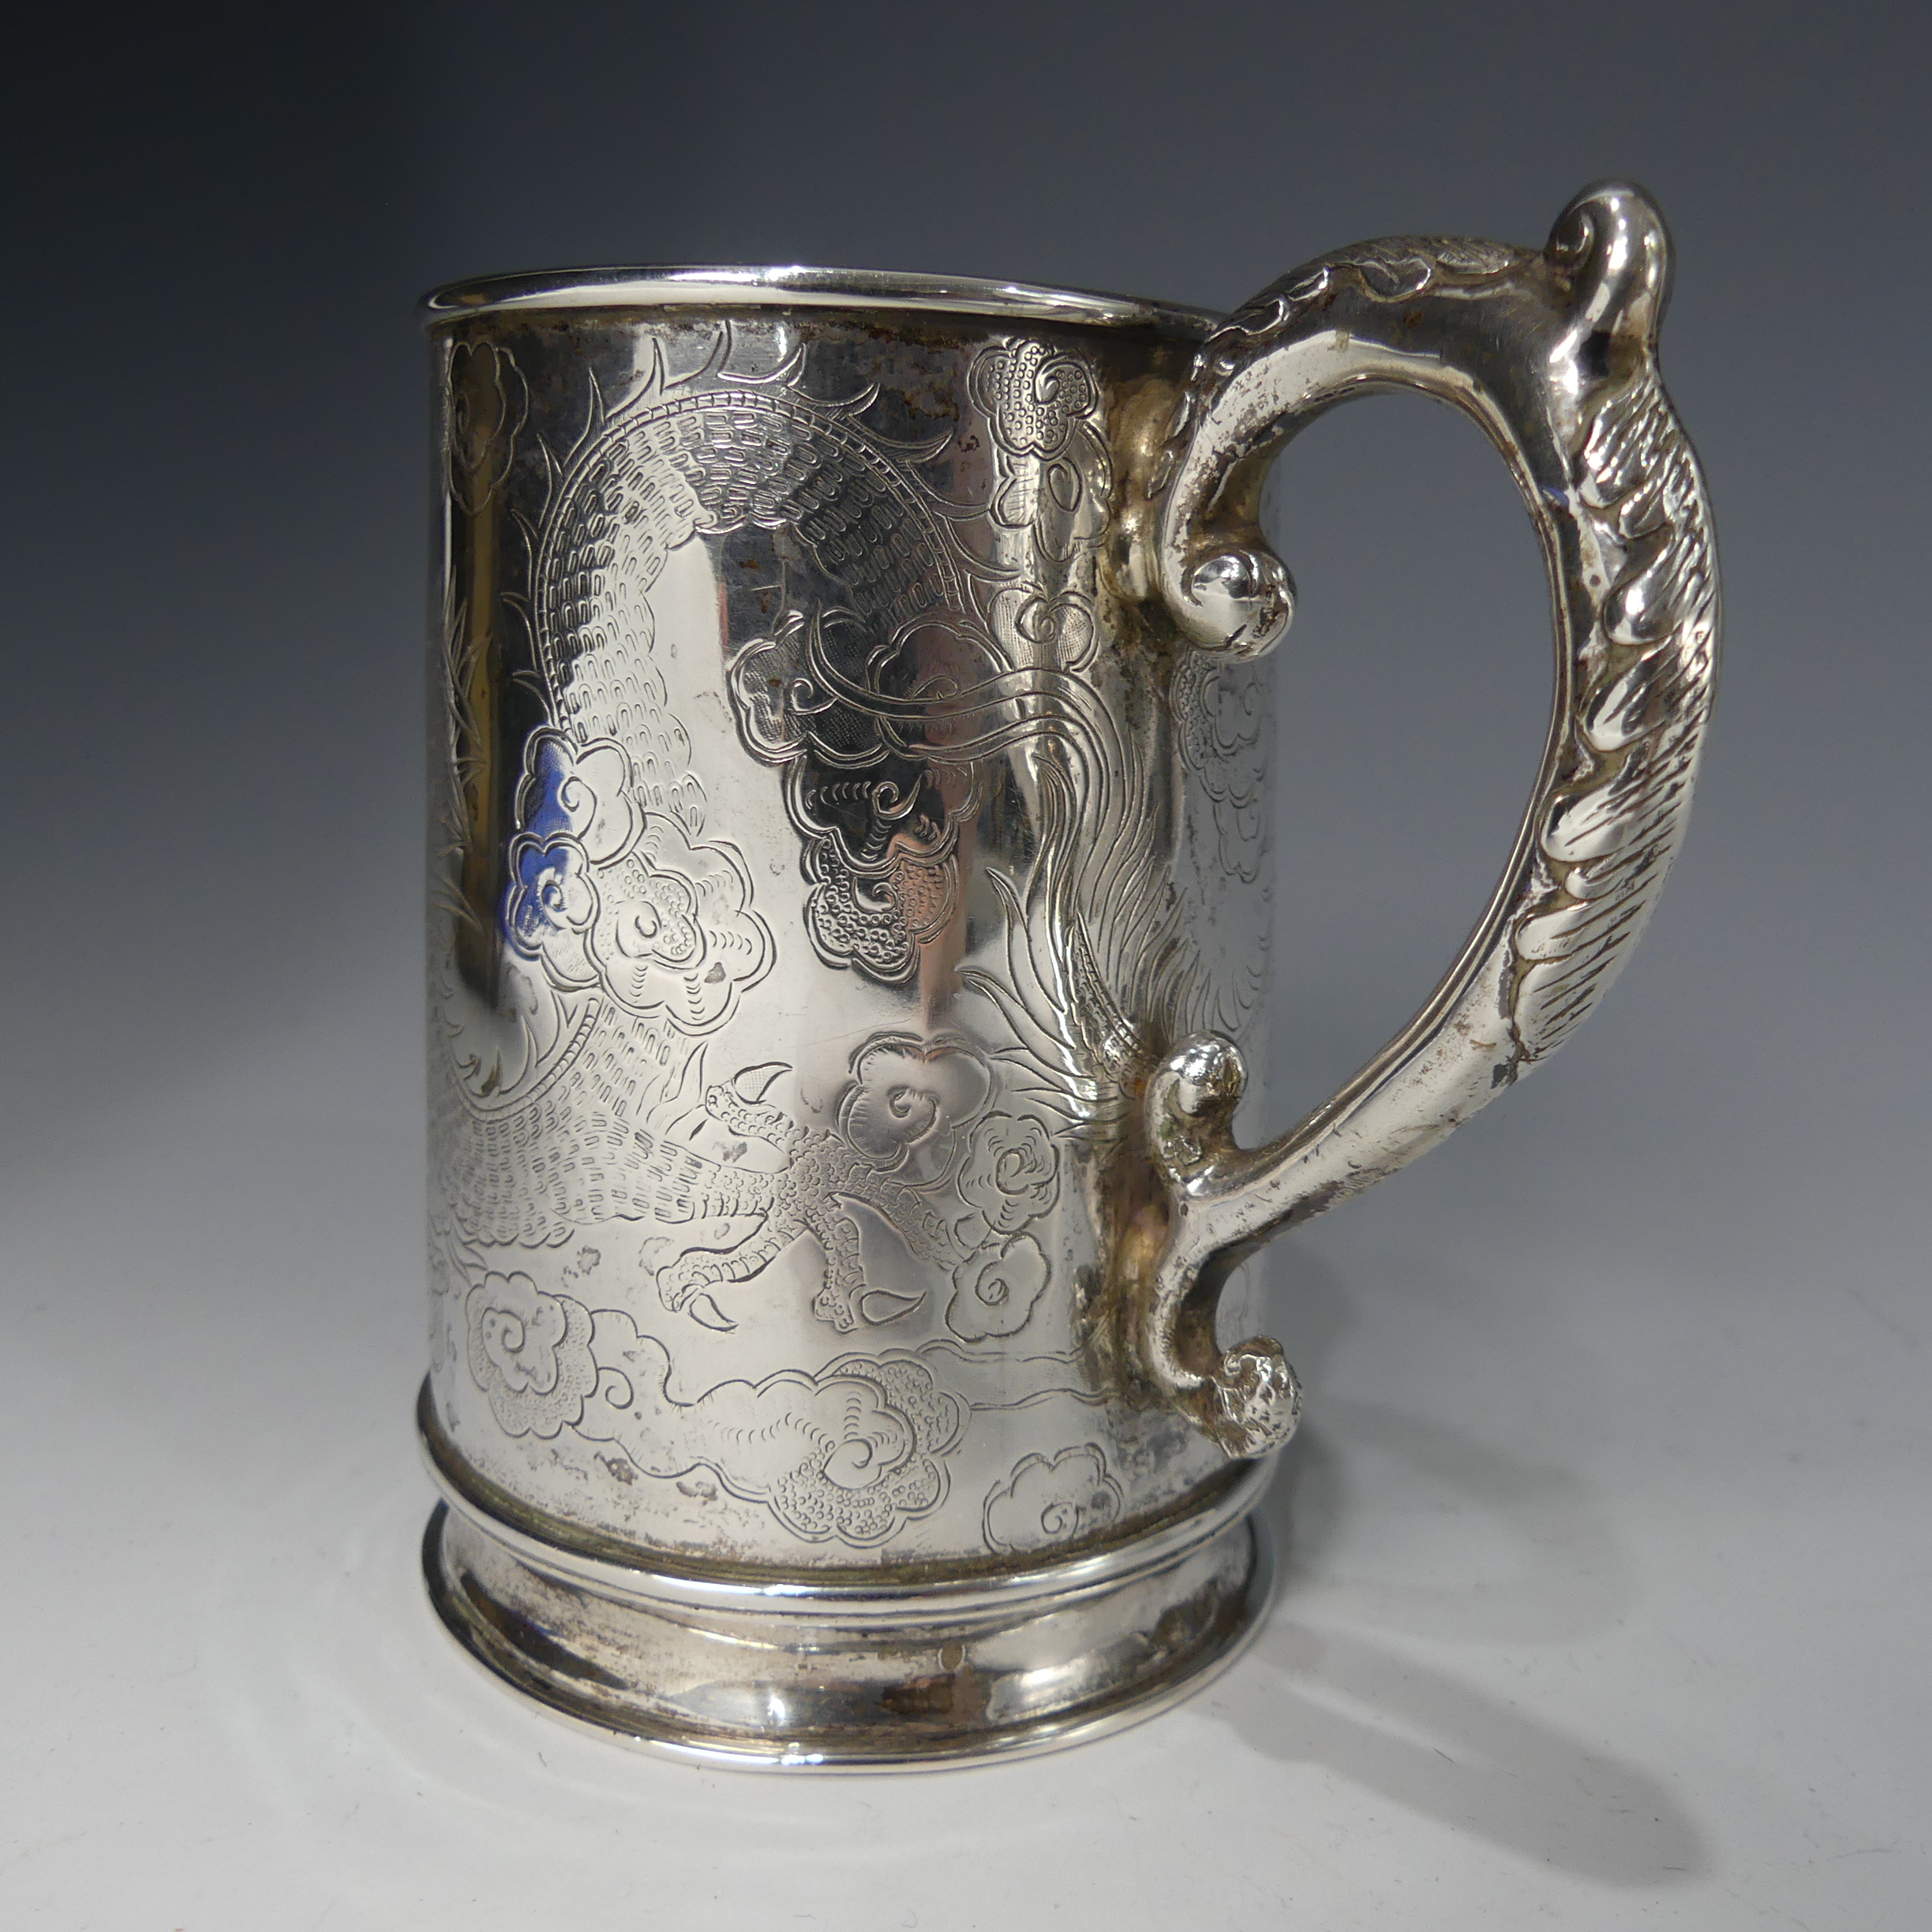 A 19thC Chinese export silver Mug, by Hung Chong, of conical form with engraved scrolling dragon